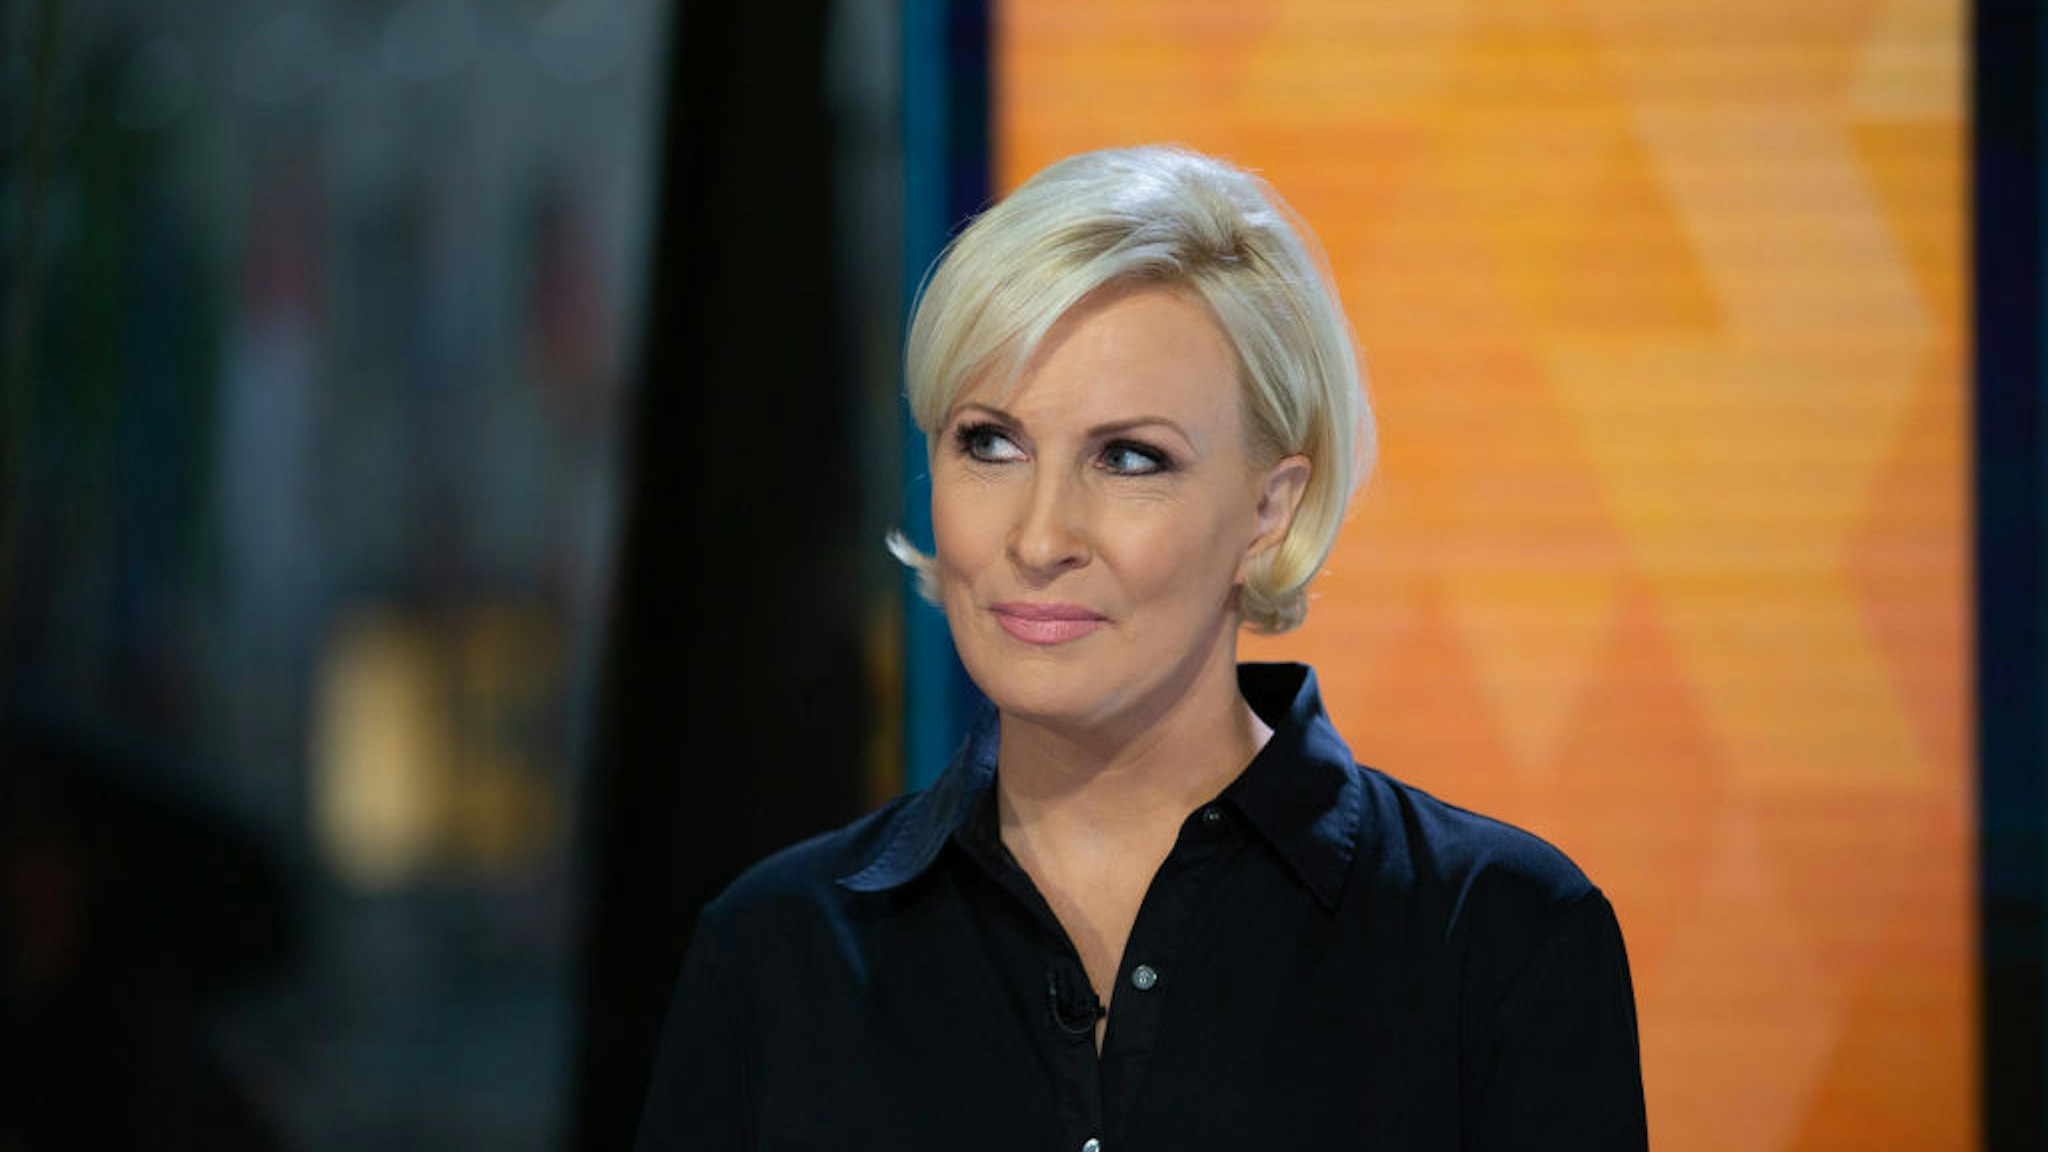 TODAY -- Pictured: Mika Brzezinski on Tuesday, September 25, 2018 -- (Photo by: Nathan Congleton/NBCU Photo Bank/NBCUniversal via Getty Images via Getty Images)